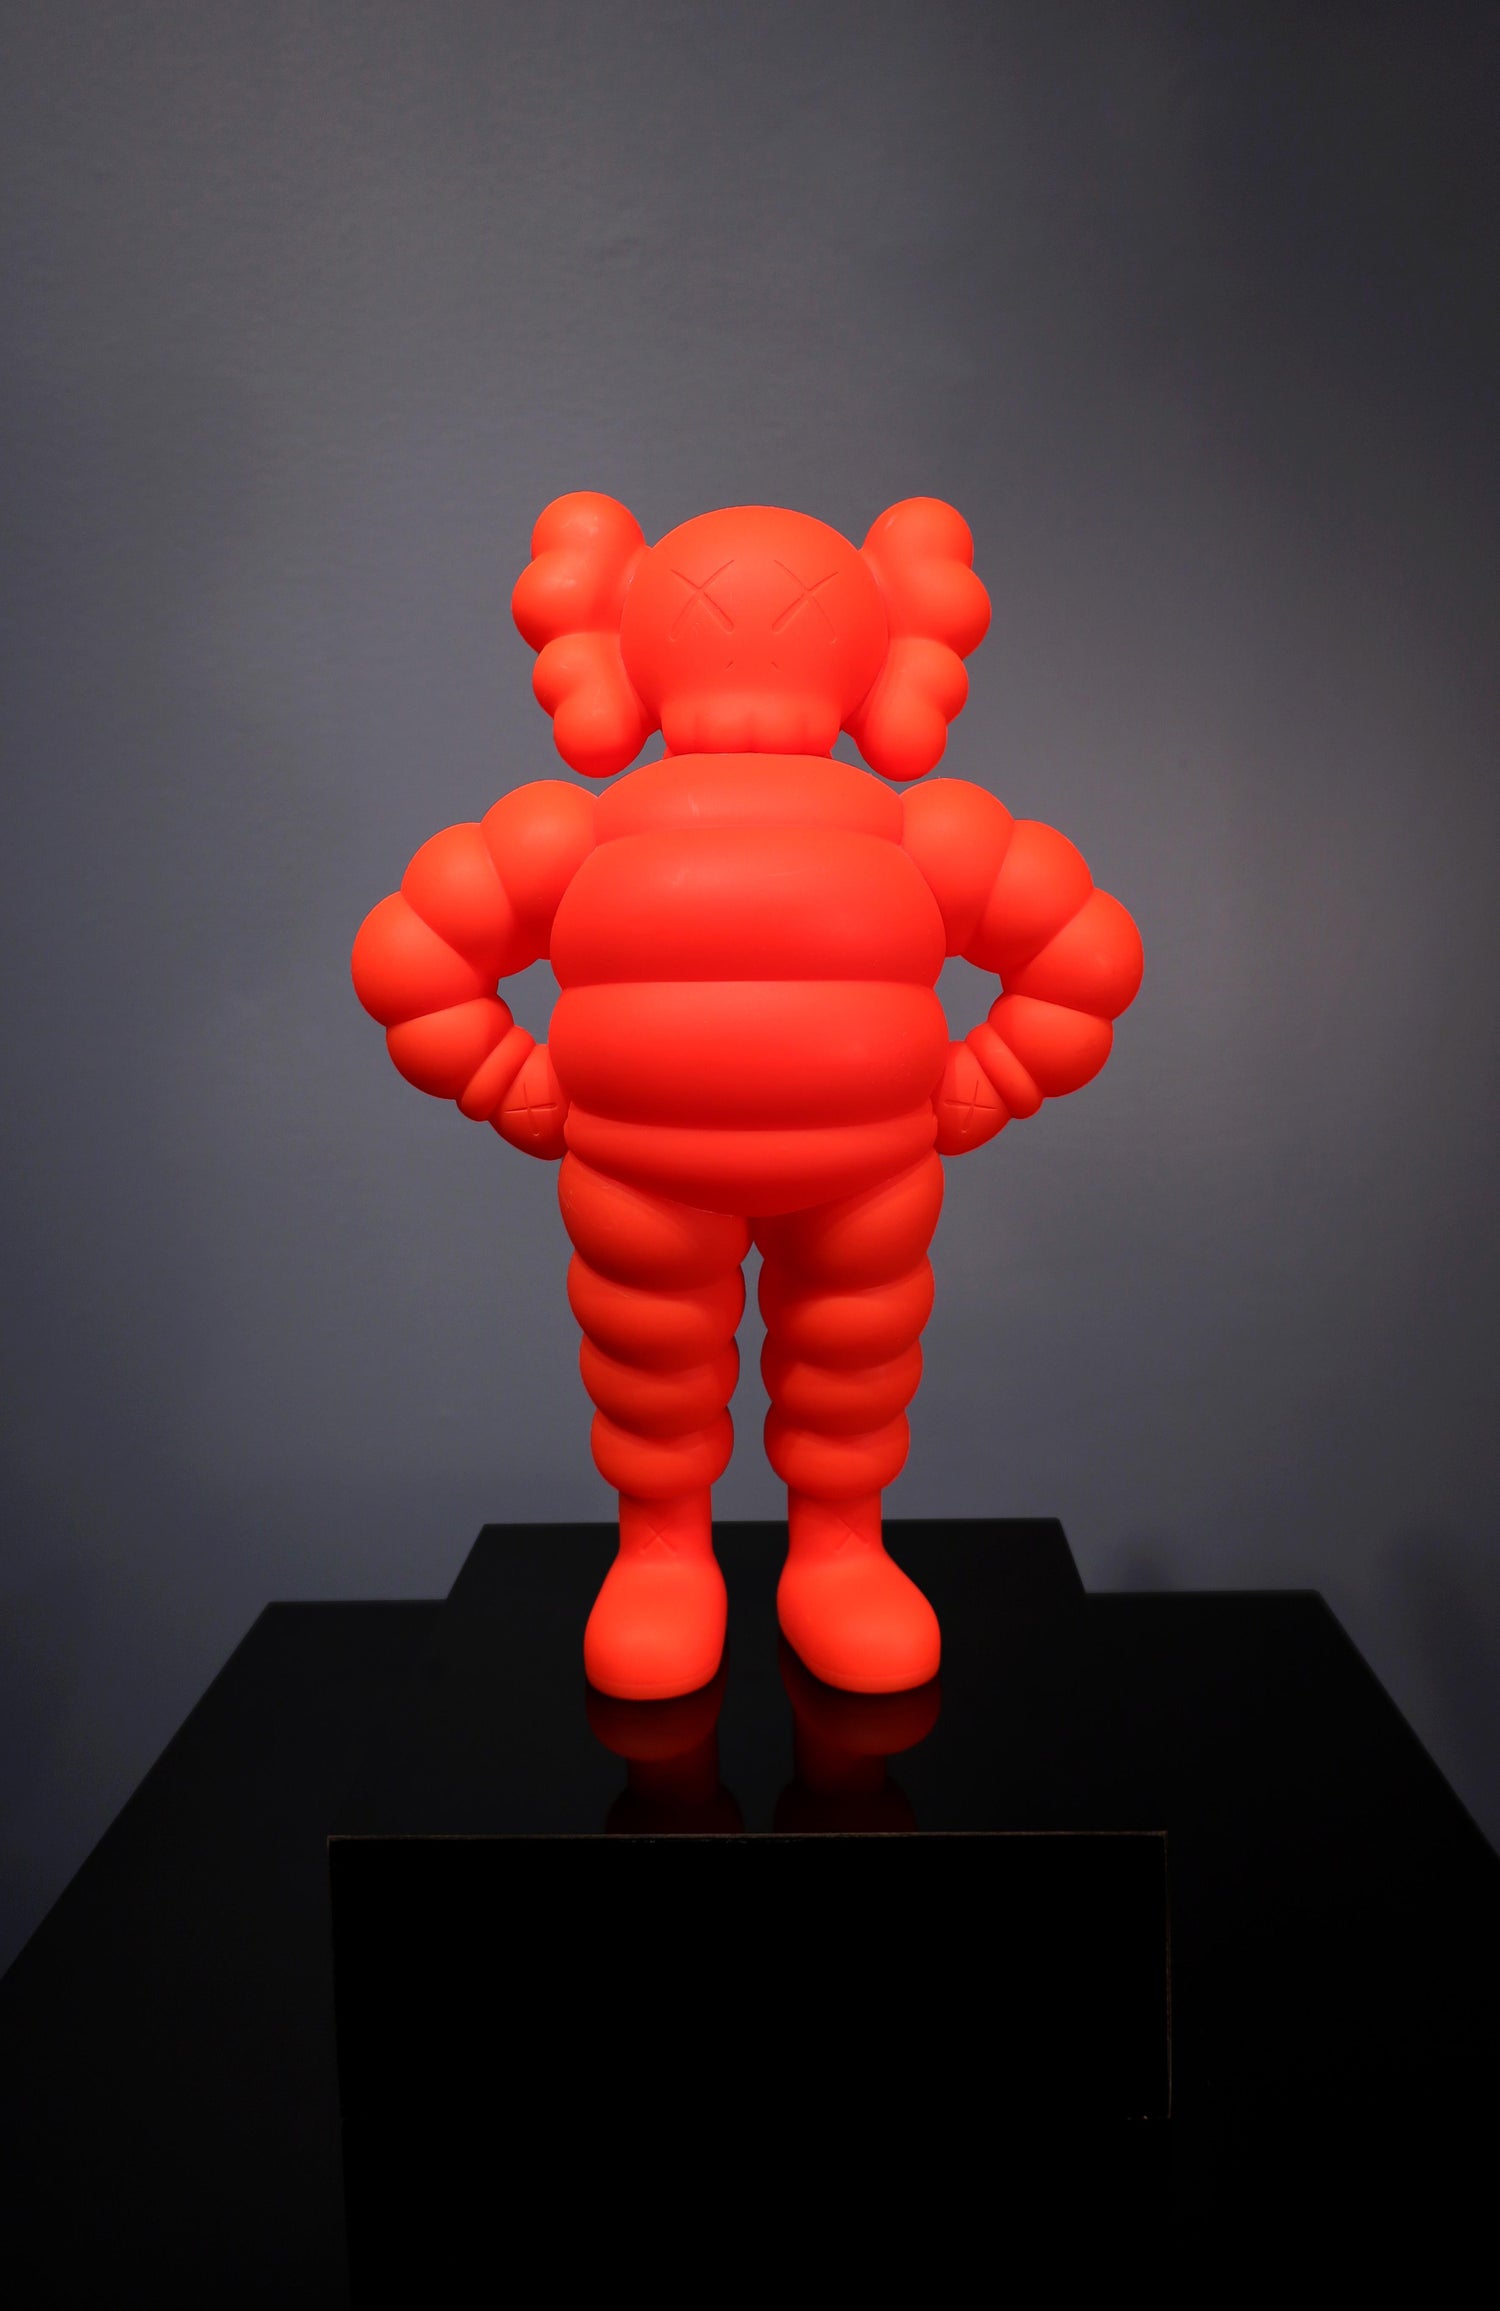 KAWS, Medicom Toy Time Off Figures Available For Immediate Sale At Sotheby's